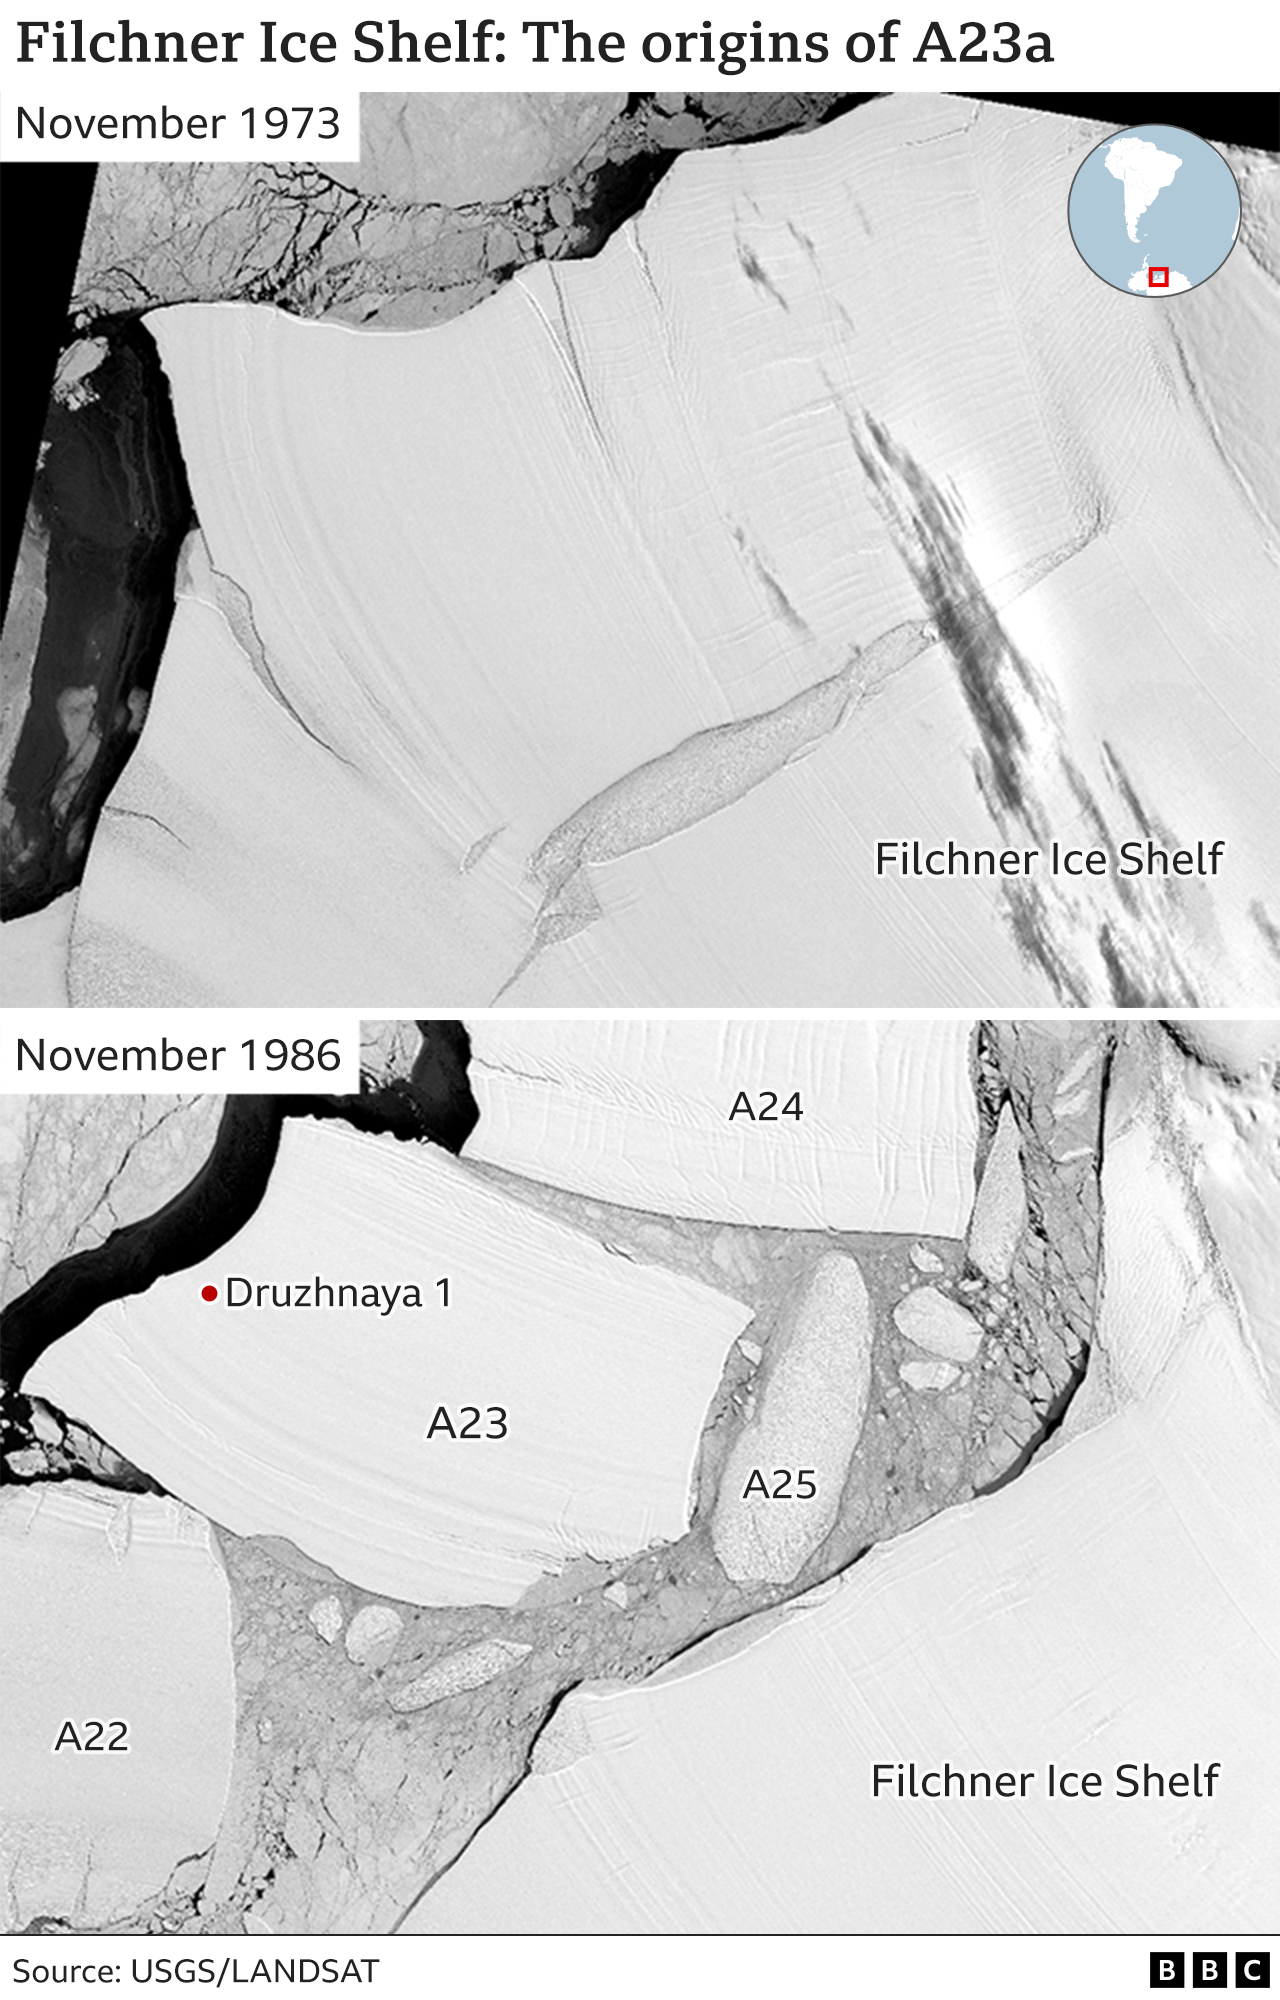 Satellite images show the origins of iceberg A23a at the Filchner Ice Shelf